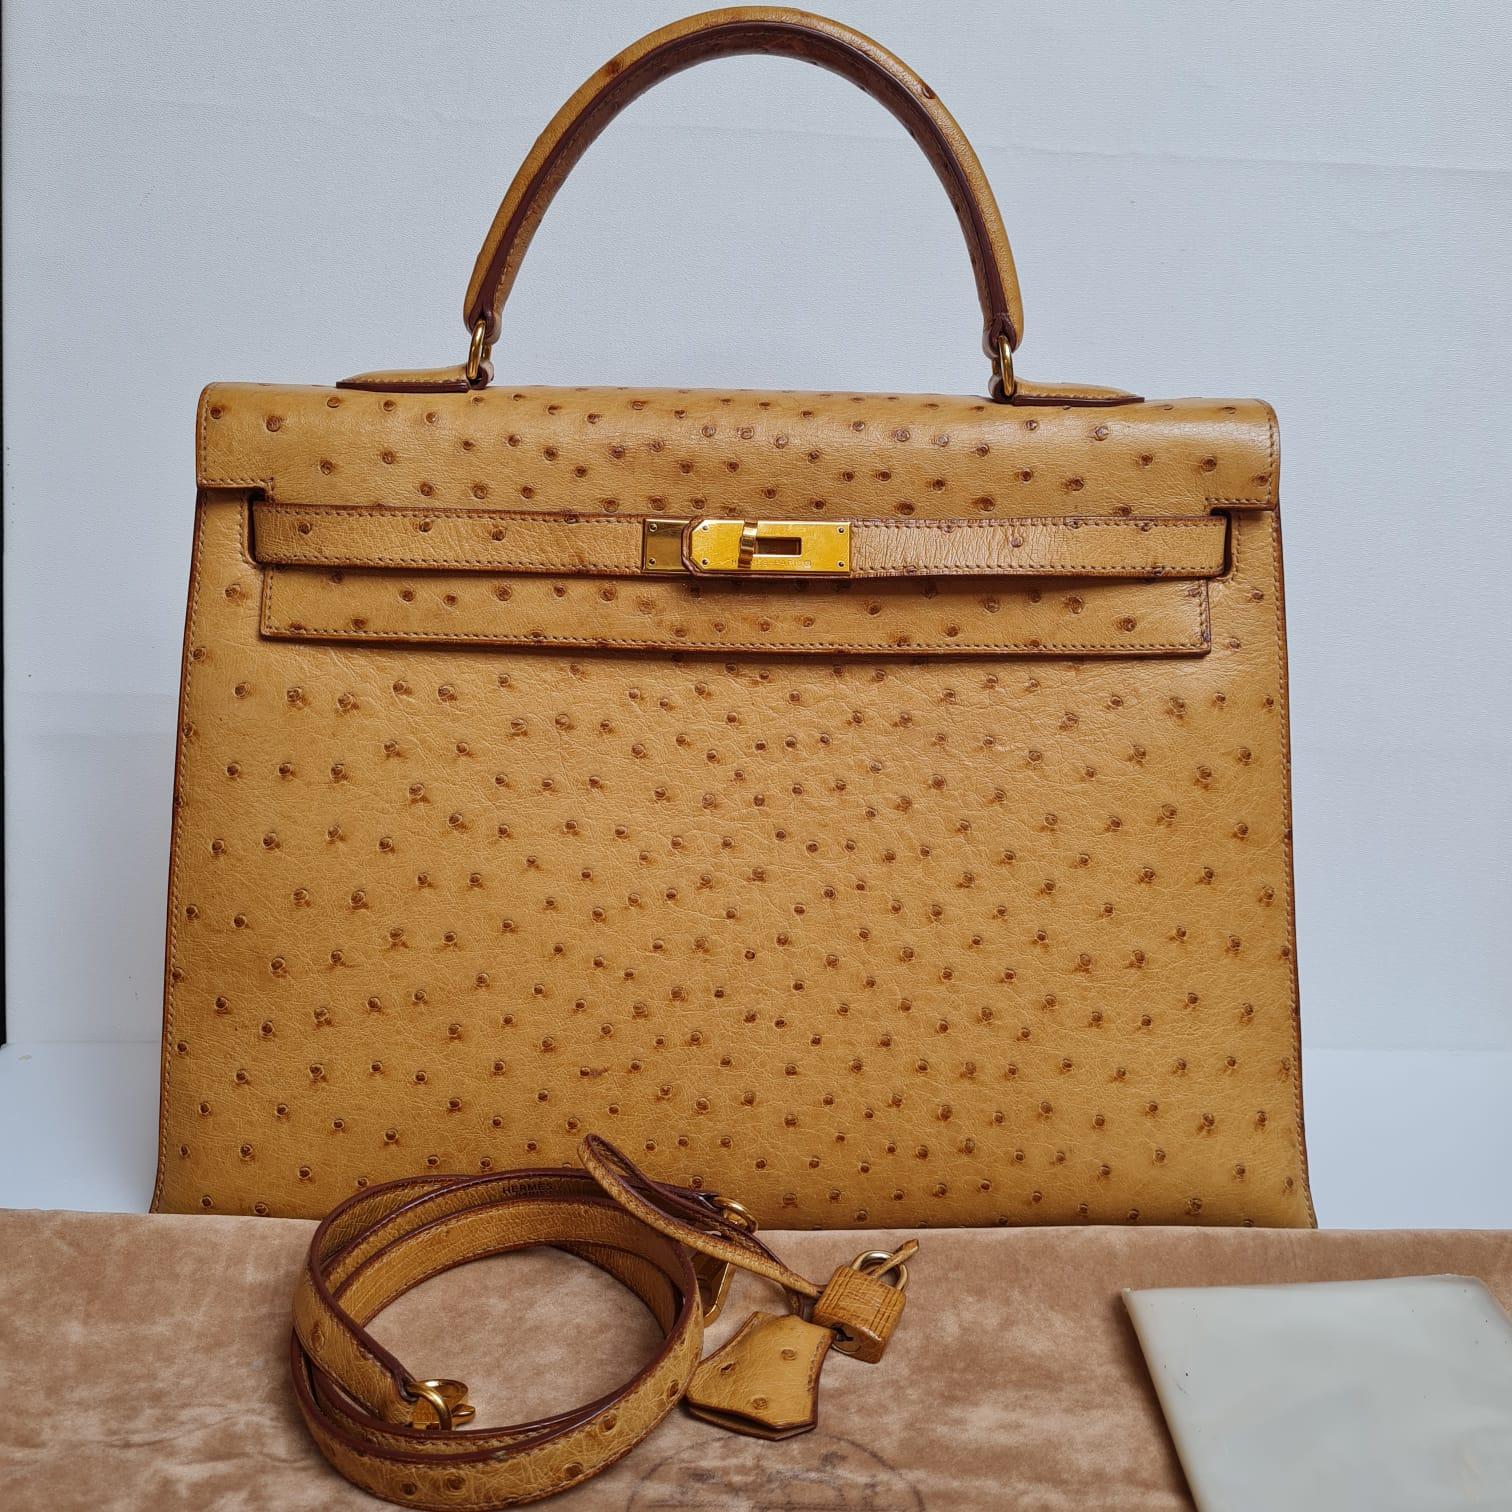 Beautiful vintage kelly 35 ostrich in chestnut ostrich leather with gold hardware. Minor rubbing on the bottom part and some corners, but overall still in great vintage condition. Comes with its raincoat, clochette, padlock, keys, strap and dust